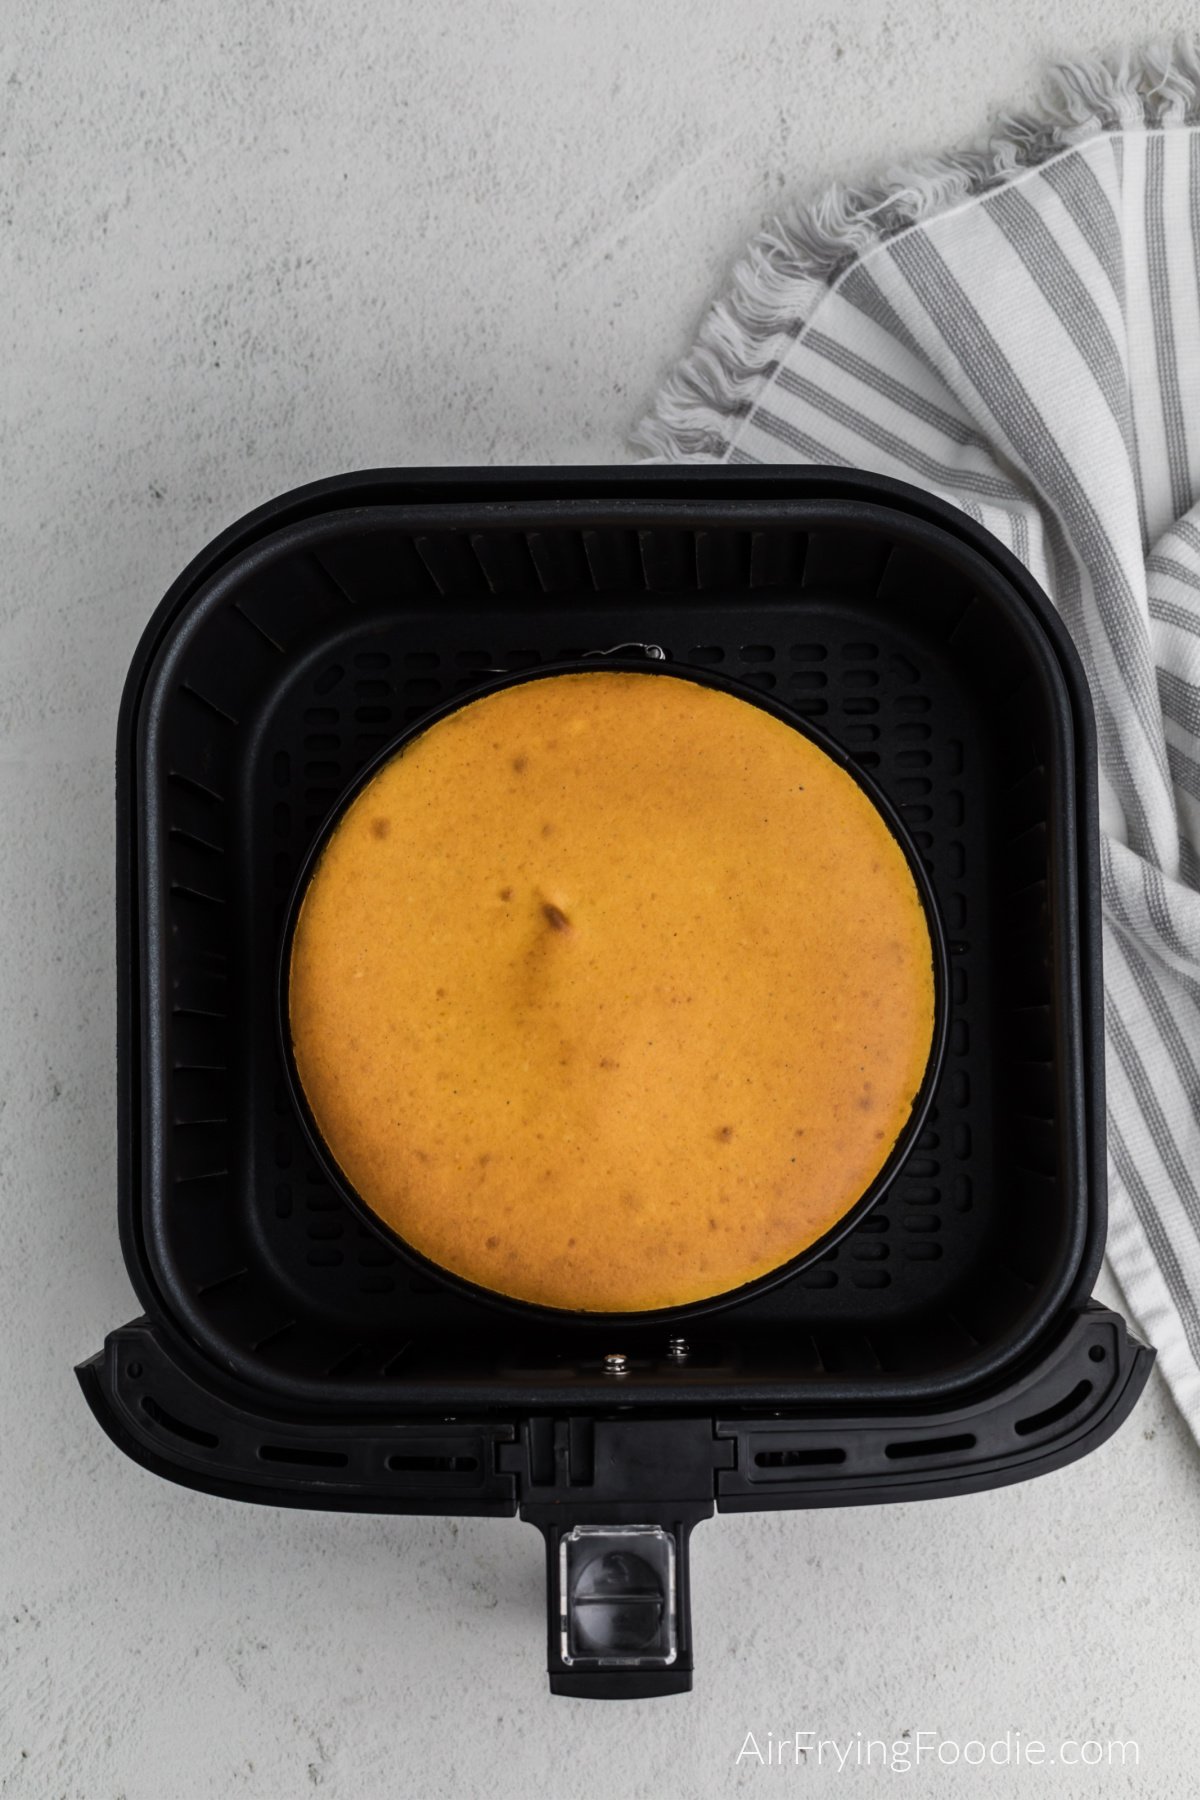 Fully cooked pumpkin cheesecake in the air fryer basket